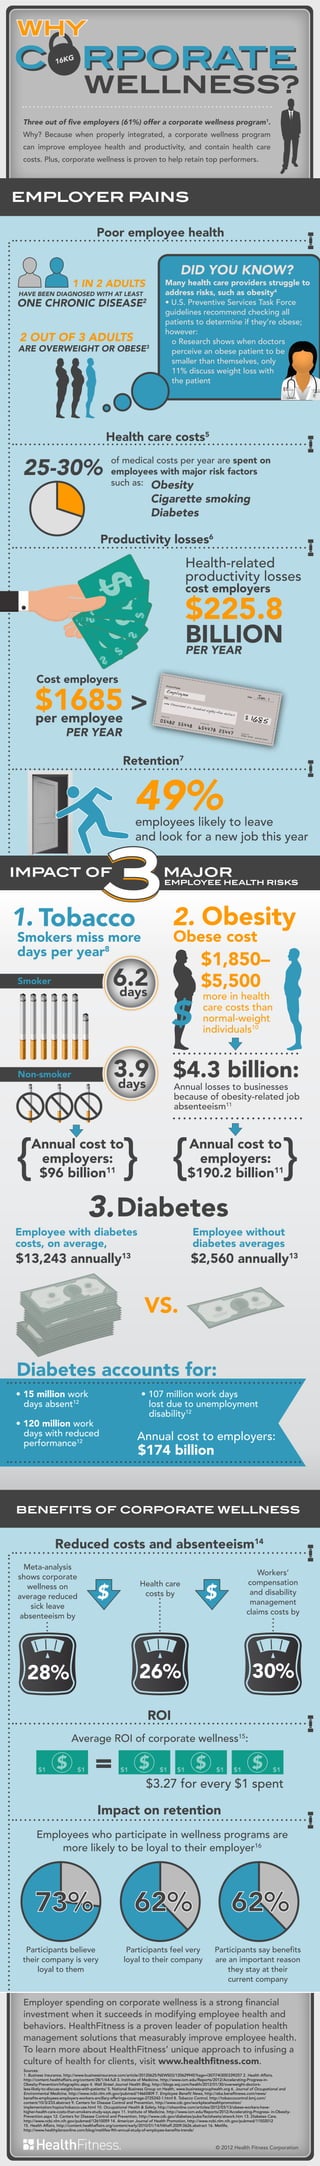 WHY

CORPORATE
16KG

WELLNESS?

Three out of five employers (61%) offer a corporate wellness program1.
Why? Because when properly integrated, a corporate wellness program
can improve employee health and productivity, and contain health care
costs. Plus, corporate wellness is proven to help retain top performers.

EMPLOYER PAINS
Poor employee health

DID YOU KNOW?

1 IN 2 ADULTS
HAVE BEEN DIAGNOSED WITH AT LEAST
2

ONE CHRONIC DISEASE

2 OUT OF 3 ADULTS

ARE OVERWEIGHT OR OBESE3

Many health care providers struggle to
address risks, such as obesity4
• U.S. Preventive Services Task Force
guidelines recommend checking all
patients to determine if they’re obese;
however:
o Research shows when doctors
perceive an obese patient to be
smaller than themselves, only
11% discuss weight loss with
the patient

Health care costs5

25-30%

of medical costs per year are spent on
employees with major risk factors
such as: Obesity

Cigarette smoking
Diabetes

Productivity losses6

$

Health-related
productivity losses
cost employers

$225.8
BILLION
PER YEAR

Cost employers

$1685 >
per employee

Employ

ee

Jan. 1

one th
ous

and six
hundre

d eighty
-f

1685

ive doll
ars

PER YEAR

Retention7

49%

employees likely to leave
and look for a new job this year

IMPACT OF

MAJOR

EMPLOYEE HEAL
TH RISKS

2. Obesity

1. Tobacco

Obese cost

Smokers miss more
days per year8

$1,850–
$5,500

6.2
days

Smoker

more in health
care costs than
normal-weight
individuals10

$

3.9 $4.3 billion:
days

Non-smoker

Annual losses to businesses
because of obesity-related job
absenteeism11

{

{ {

Annual cost to
employers:
$96 billion11

{

Annual cost to
employers:
$190.2 billion11

3. Diabetes
Employee with diabetes
costs, on average,

Employee without
diabetes averages

$13,243 annually13

$2,560 annually13

VS.
Diabetes accounts for:
• 15 million work
days absent12

• 107 million work days
lost due to unemployment
disability12

• 120 million work
days with reduced
performance12

Annual cost to employers:

$174 billion

BENEFITS OF CORPORATE WELLNESS

Reduced costs and absenteeism14
Meta-analysis
shows corporate
wellness on
average reduced
sick leave
absenteeism by

Health care
costs by

$

Workers’
compensation
and disability
management
claims costs by

$

30%

26%

28%

ROI
Average ROI of corporate wellness15:
$1

$

$1

=

$1

$

$1

$1

$

$1

$1

$

$1

$3.27 for every $1 spent

Impact on retention
Employees who participate in wellness programs are
more likely to be loyal to their employer16

73%
Participants believe
their company is very
loyal to them

62%
Participants feel very
loyal to their company

62%
Participants say benefits
are an important reason
they stay at their
current company

Employer spending on corporate wellness is a strong financial
investment when it succeeds in modifying employee health and
behaviors. HealthFitness is a proven leader of population health
management solutions that measurably improve employee health.
To learn more about HealthFitness’ unique approach to infusing a
culture of health for clients, visit www.healthfitness.com.
Sources:
1. Business Insurance, http://www.businessinsurance.com/article/20120625/NEWS03/120629945?tags=|307|74|305|339|257 2. Health Affairs,
http://content.healthaffairs.org/content/28/1/64.full 3. Institute of Medicine, http://www.iom.edu/Reports/2012/Accelerating-Progress-inObesity-Prevention/Infographic.aspx 4. Wall Street Journal Health Blog, http://blogs.wsj.com/health/2012/01/30/overweight-doctorsless-likely-to-discuss-weight-loss-with-patients/ 5. National Business Group on Health, www.businessgrouphealth.org 6. Journal of Occupational and
Environmental Medicine, http://www.ncbi.nlm.nih.gov/pubmed/14665809 7. Employee Benefit News, http://eba.benefitnews.com/news/
benefits-employees-employers-workers-ancillary-offerings-coverage-2725242-1.html 8. Tobacco Control, http://tobaccocontrol.bmj.com/
content/10/3/233.abstract 9. Centers for Disease Control and Prevention, http://www.cdc.gov/workplacehealthpromotion/
implementation/topics/tobacco-use.html 10. Occupational Health & Safety, http://ohsonline.com/articles/2012/03/13/obese-workers-havehigher-health-care-costs-than-smokers-study-says.aspx 11. Institute of Medicine, http://www.iom.edu/Reports/2012/Accelerating-Progress- in-ObesityPrevention.aspx 12. Centers for Disease Control and Prevention, http://www.cdc.gov/diabetes/pubs/factsheets/atwork.htm 13. Diabetes Care,
http://www.ncbi.nlm.nih.gov/pubmed/12610059 14. American Journal of Health Promotion, http://www.ncbi.nlm.nih.gov/pubmed/11502012
15. Health Affairs, http://content.healthaffairs.org/content/early/2010/01/14/hlthaff.2009.0626.abstract 16. Metlife,
http://www.healthplansonline.com/blog/metlifes-9th-annual-study-of-employee-benefits-trends/

© 2012 Health Fitness Corporation

 